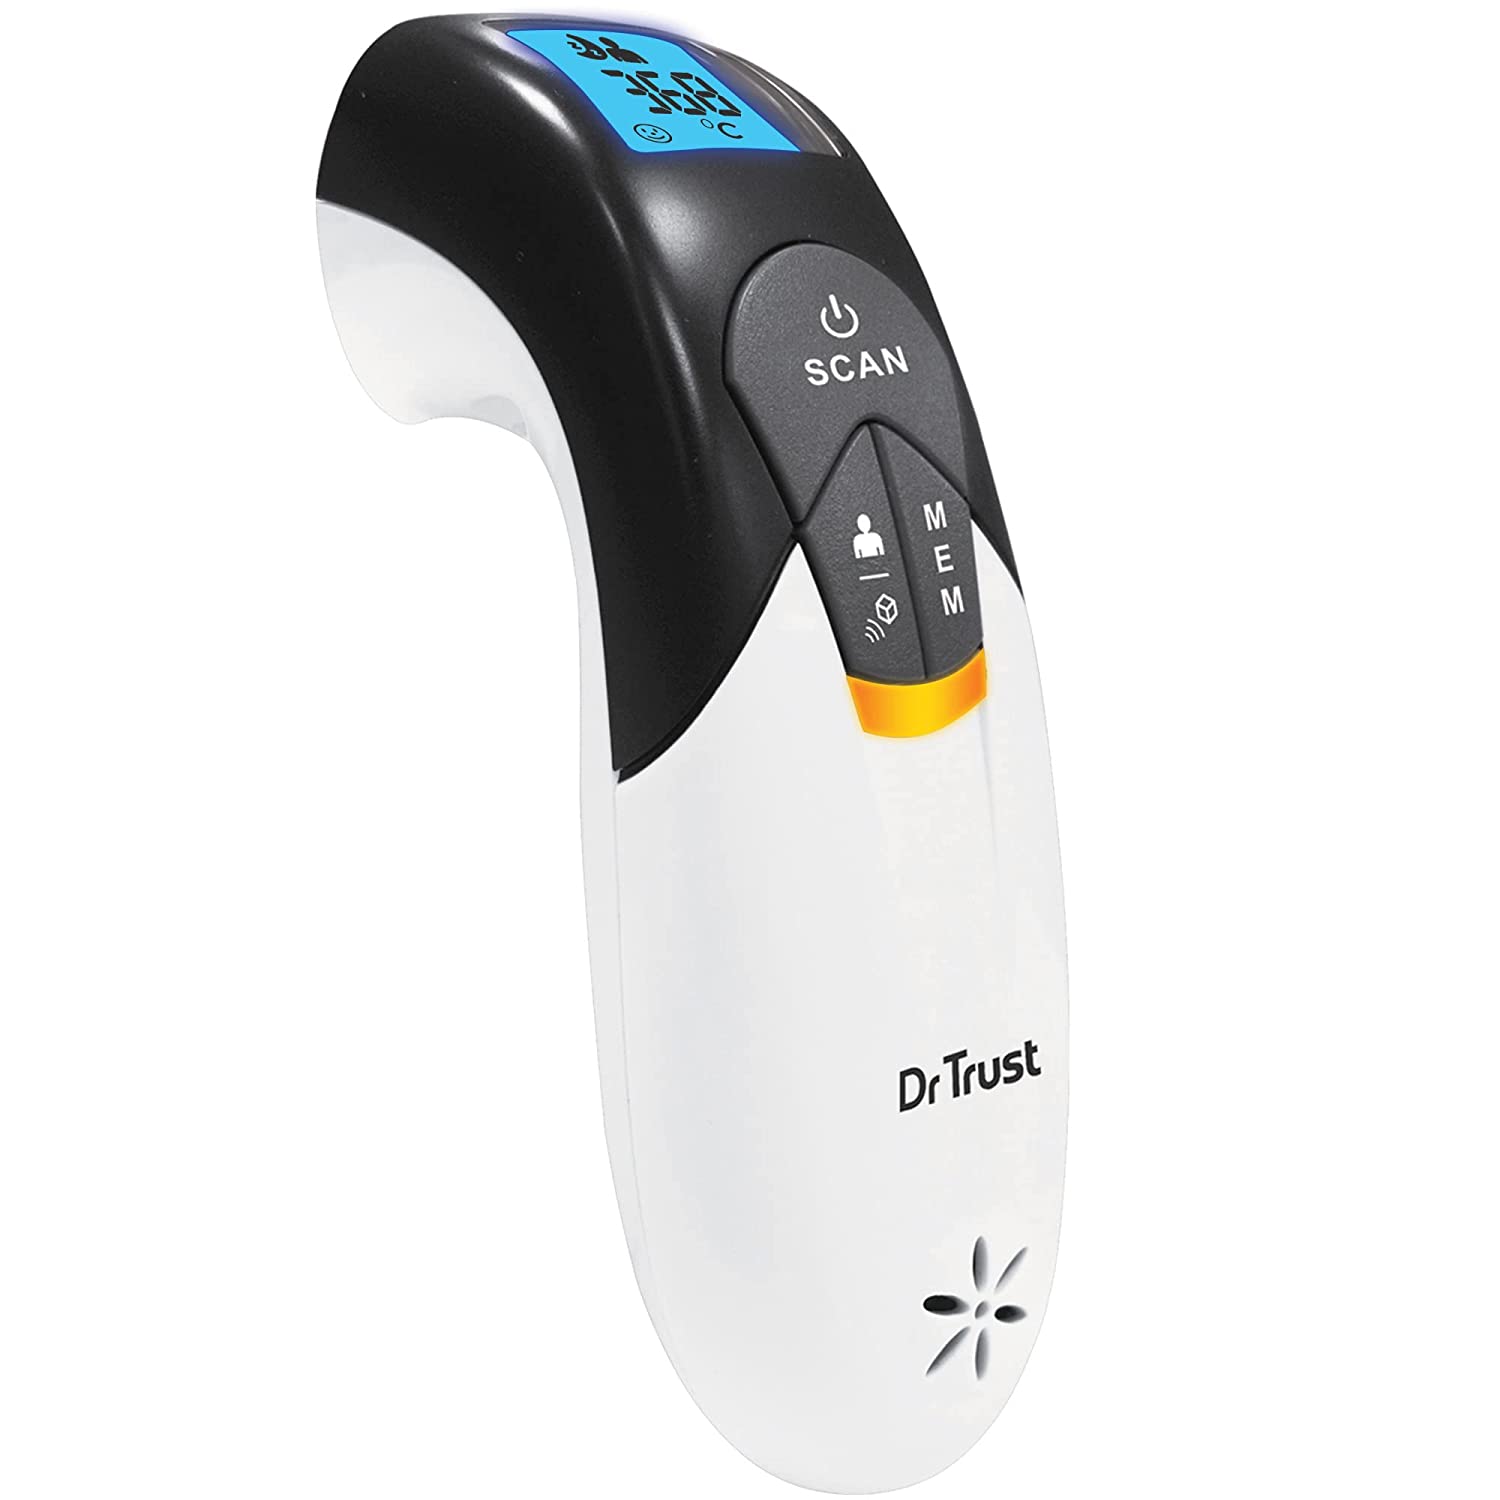 Dr Trust USA Clinical Digital Non Contact Infrared Forehead Thermometer for Fever, Body Temperature